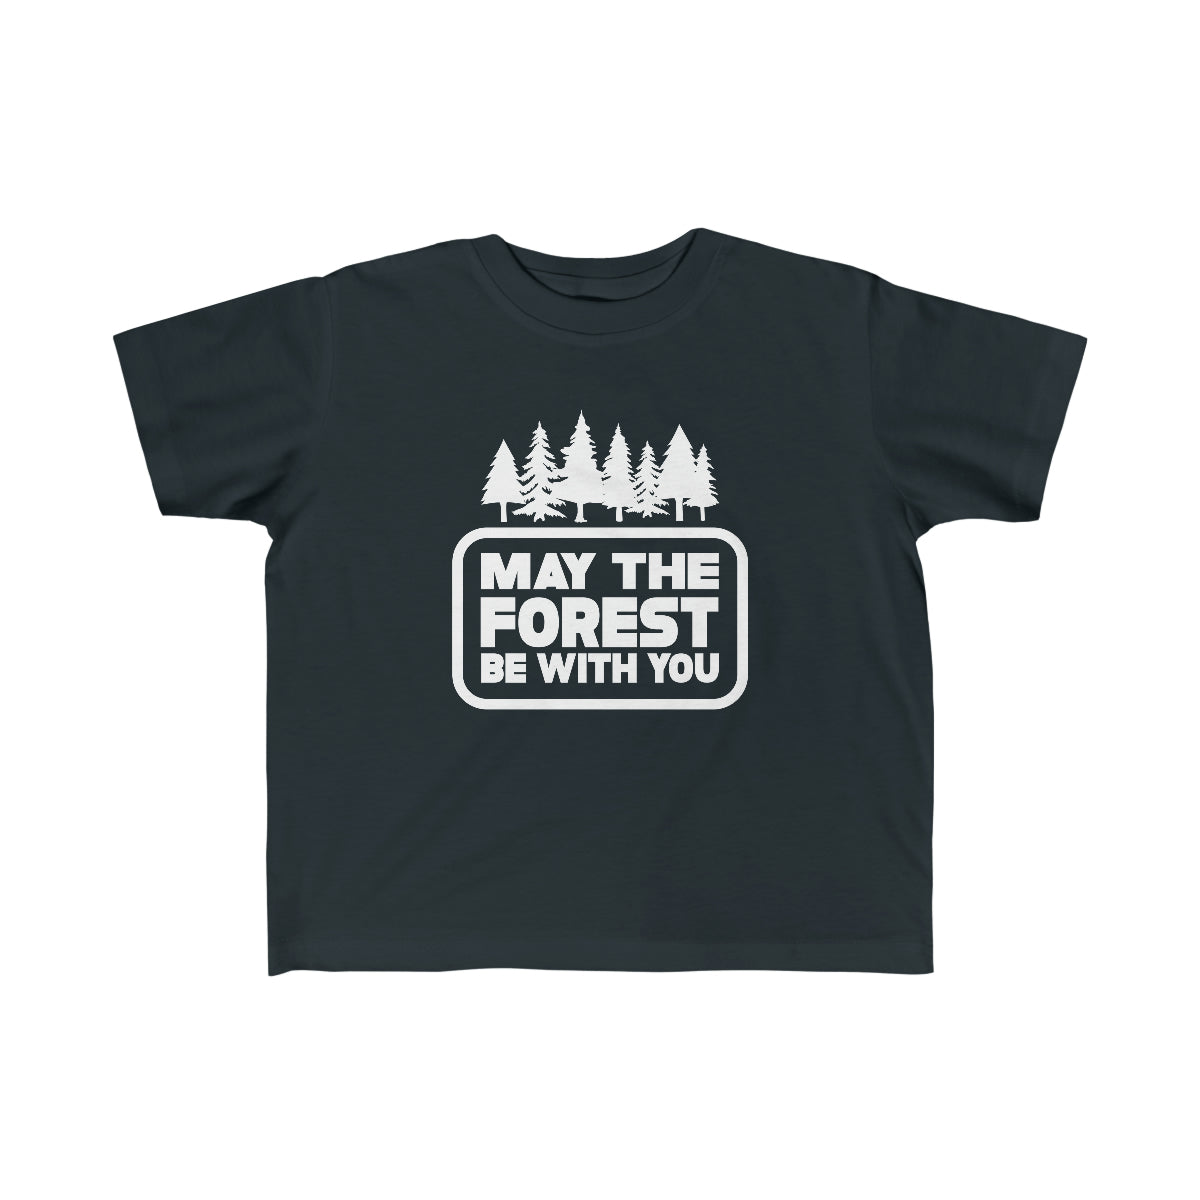 May The Forest Be With You Toddler Tee Black / 2T - The Northwest Store